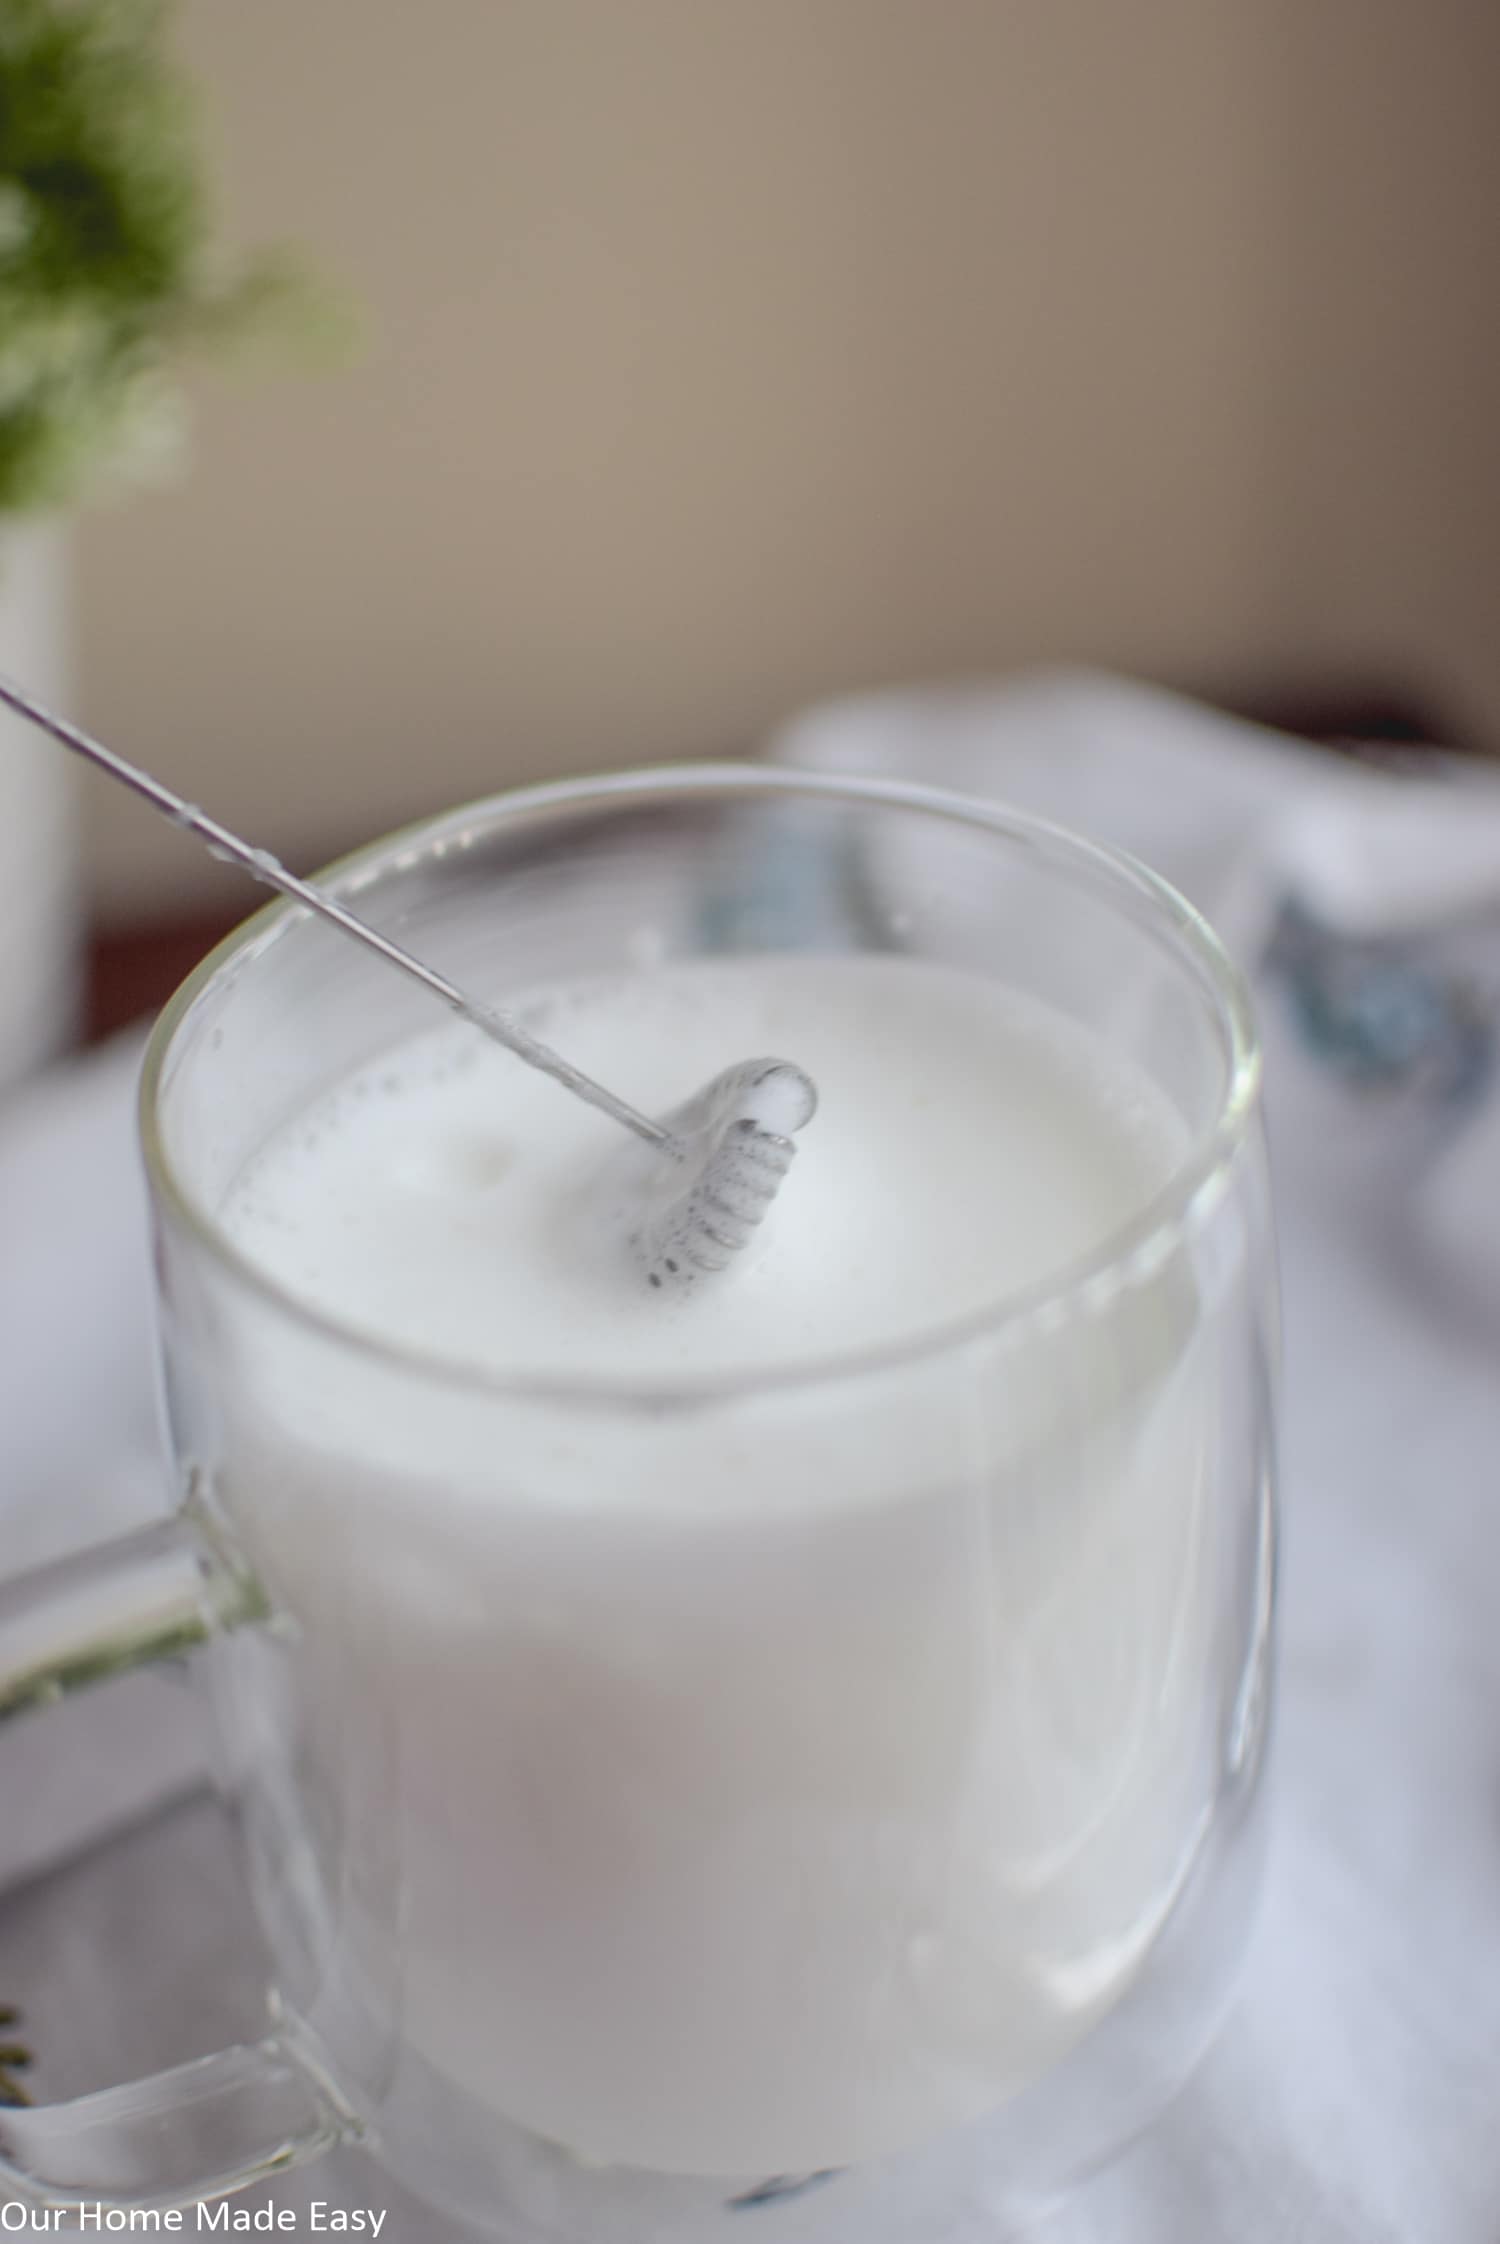 How to Make Perfect Cold Foam with a Frother Easy